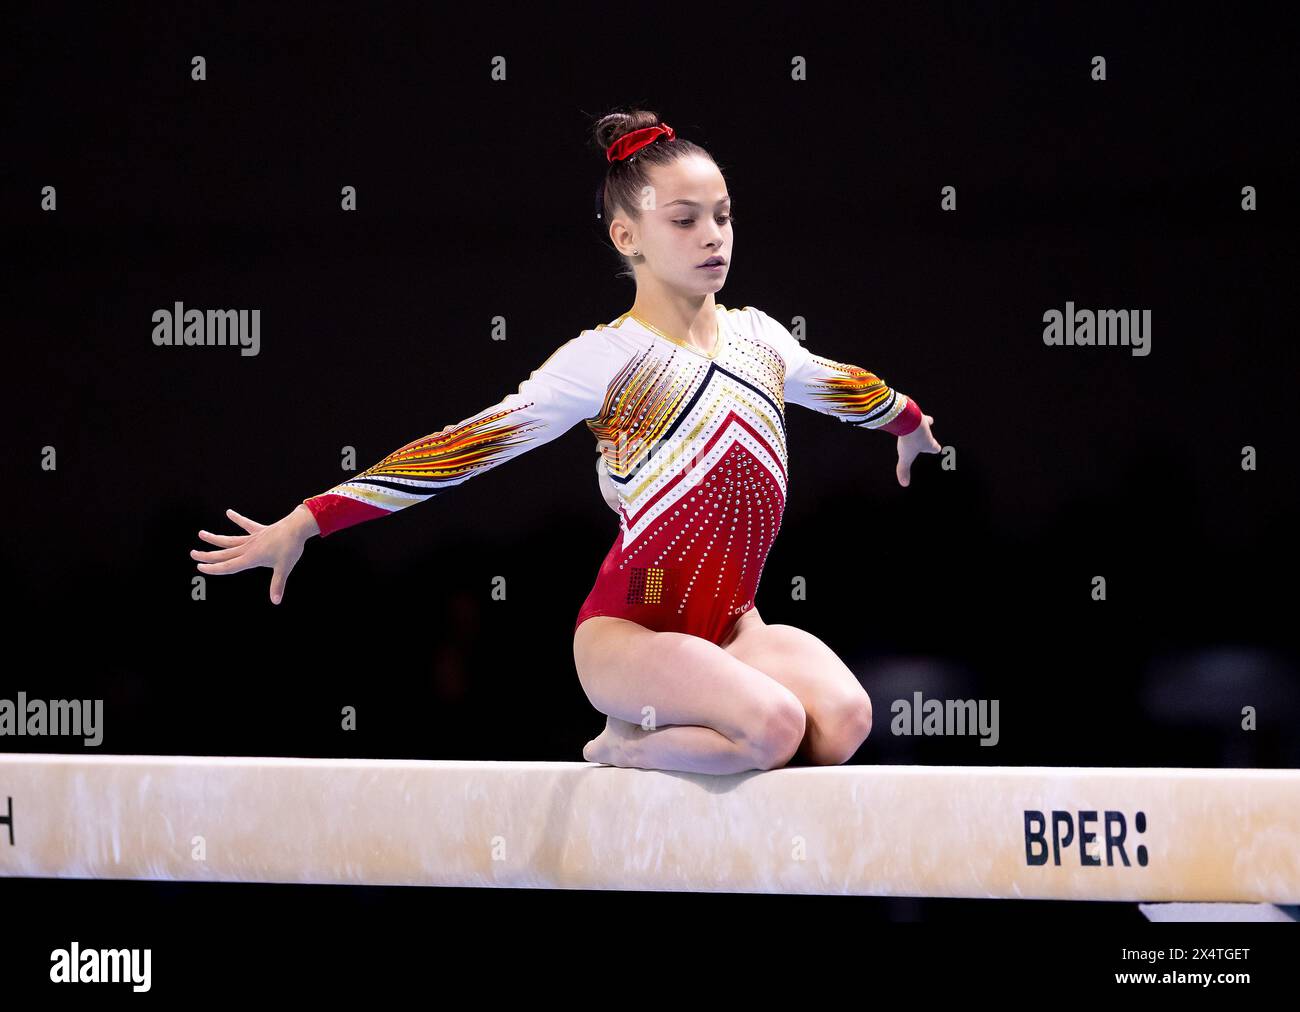 Rimini, Italy. 5th May 2024. RIMINI - Liese Vieuxtemps (BEL) in action during the junior event final on balance beam at the European Gymnastics Championships in the Fiera di Rimini  Alamy / Iris van den Broek Credit: Iris van den Broek/Alamy Live News Stock Photo